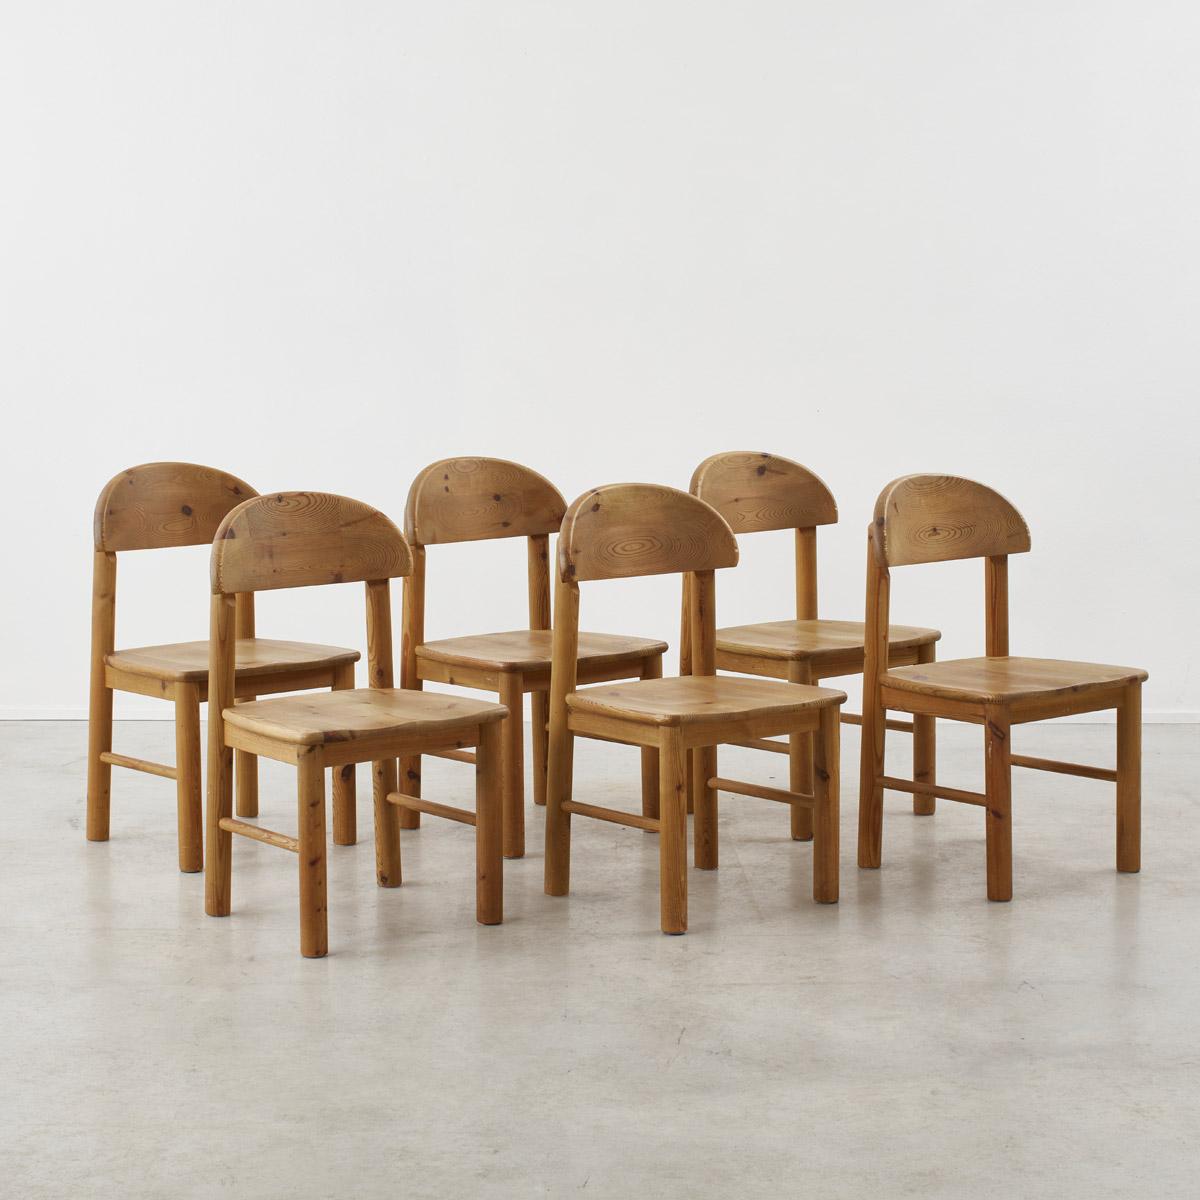 Drawing from the traditional Danish milking stool, designer Rainer Daumiller carefully balanced design and comfort. The seat, mimicking that of the carved out stool, is designed to support the sitter, with a slanted backrest cleverly sculpted to